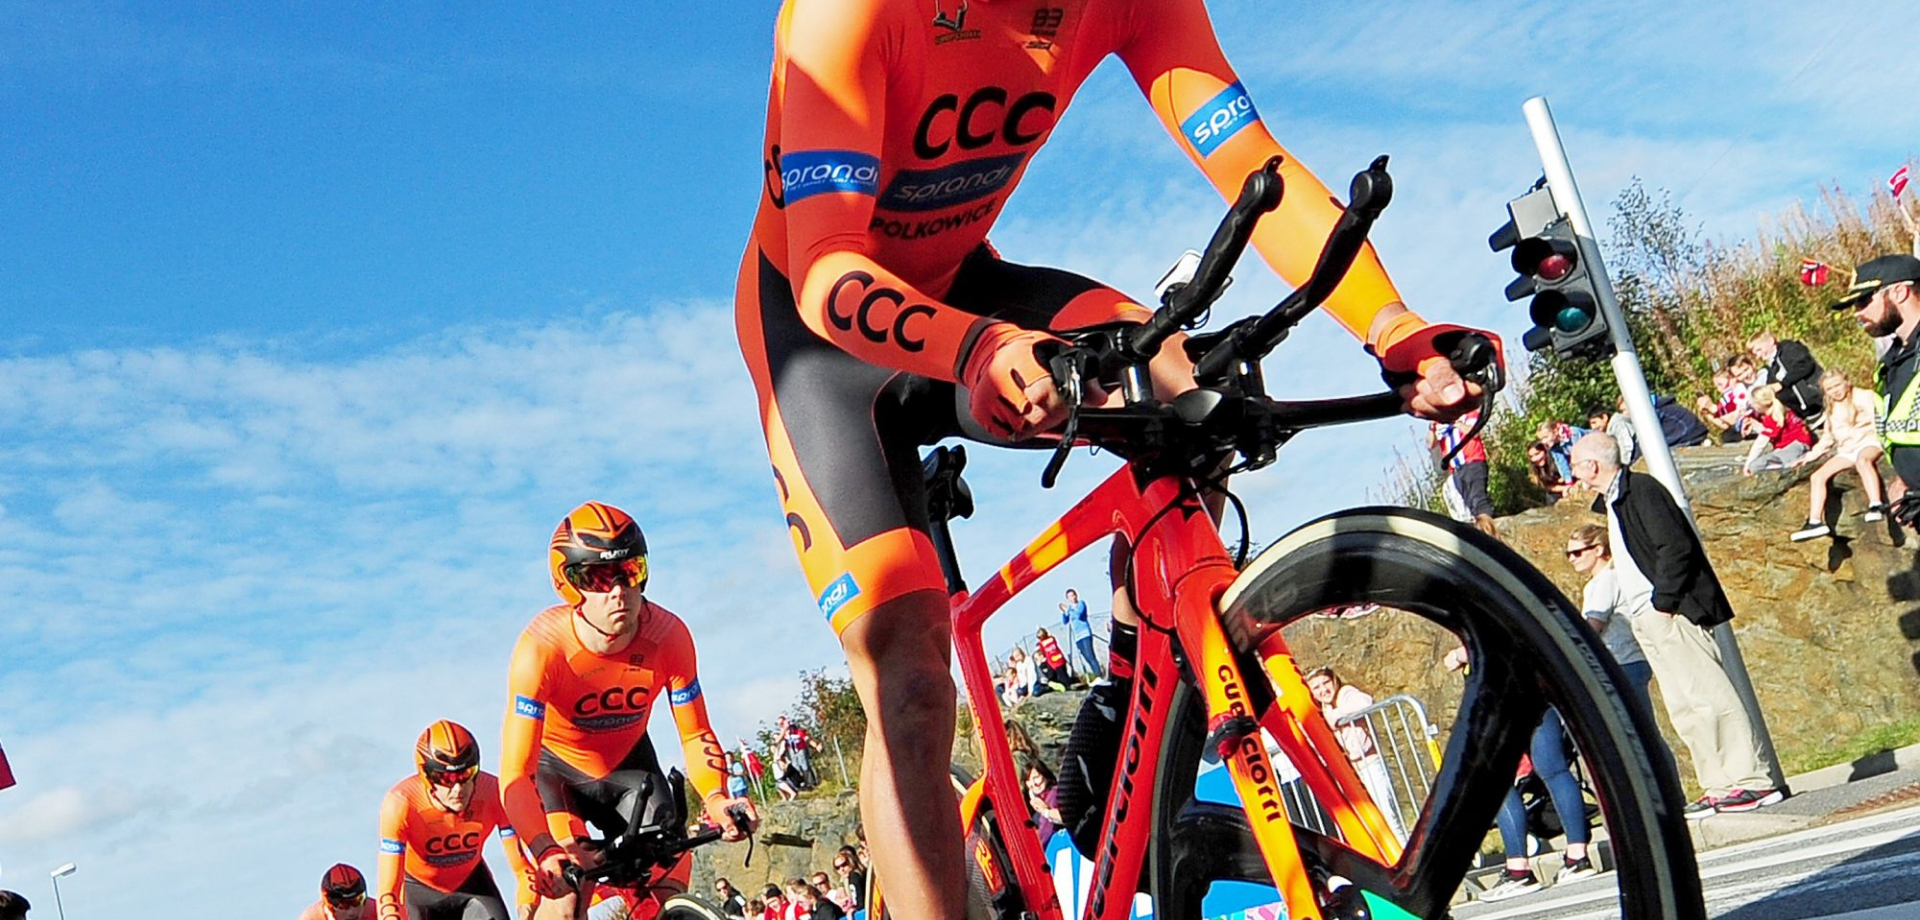 CCC joins the UCI World Tour